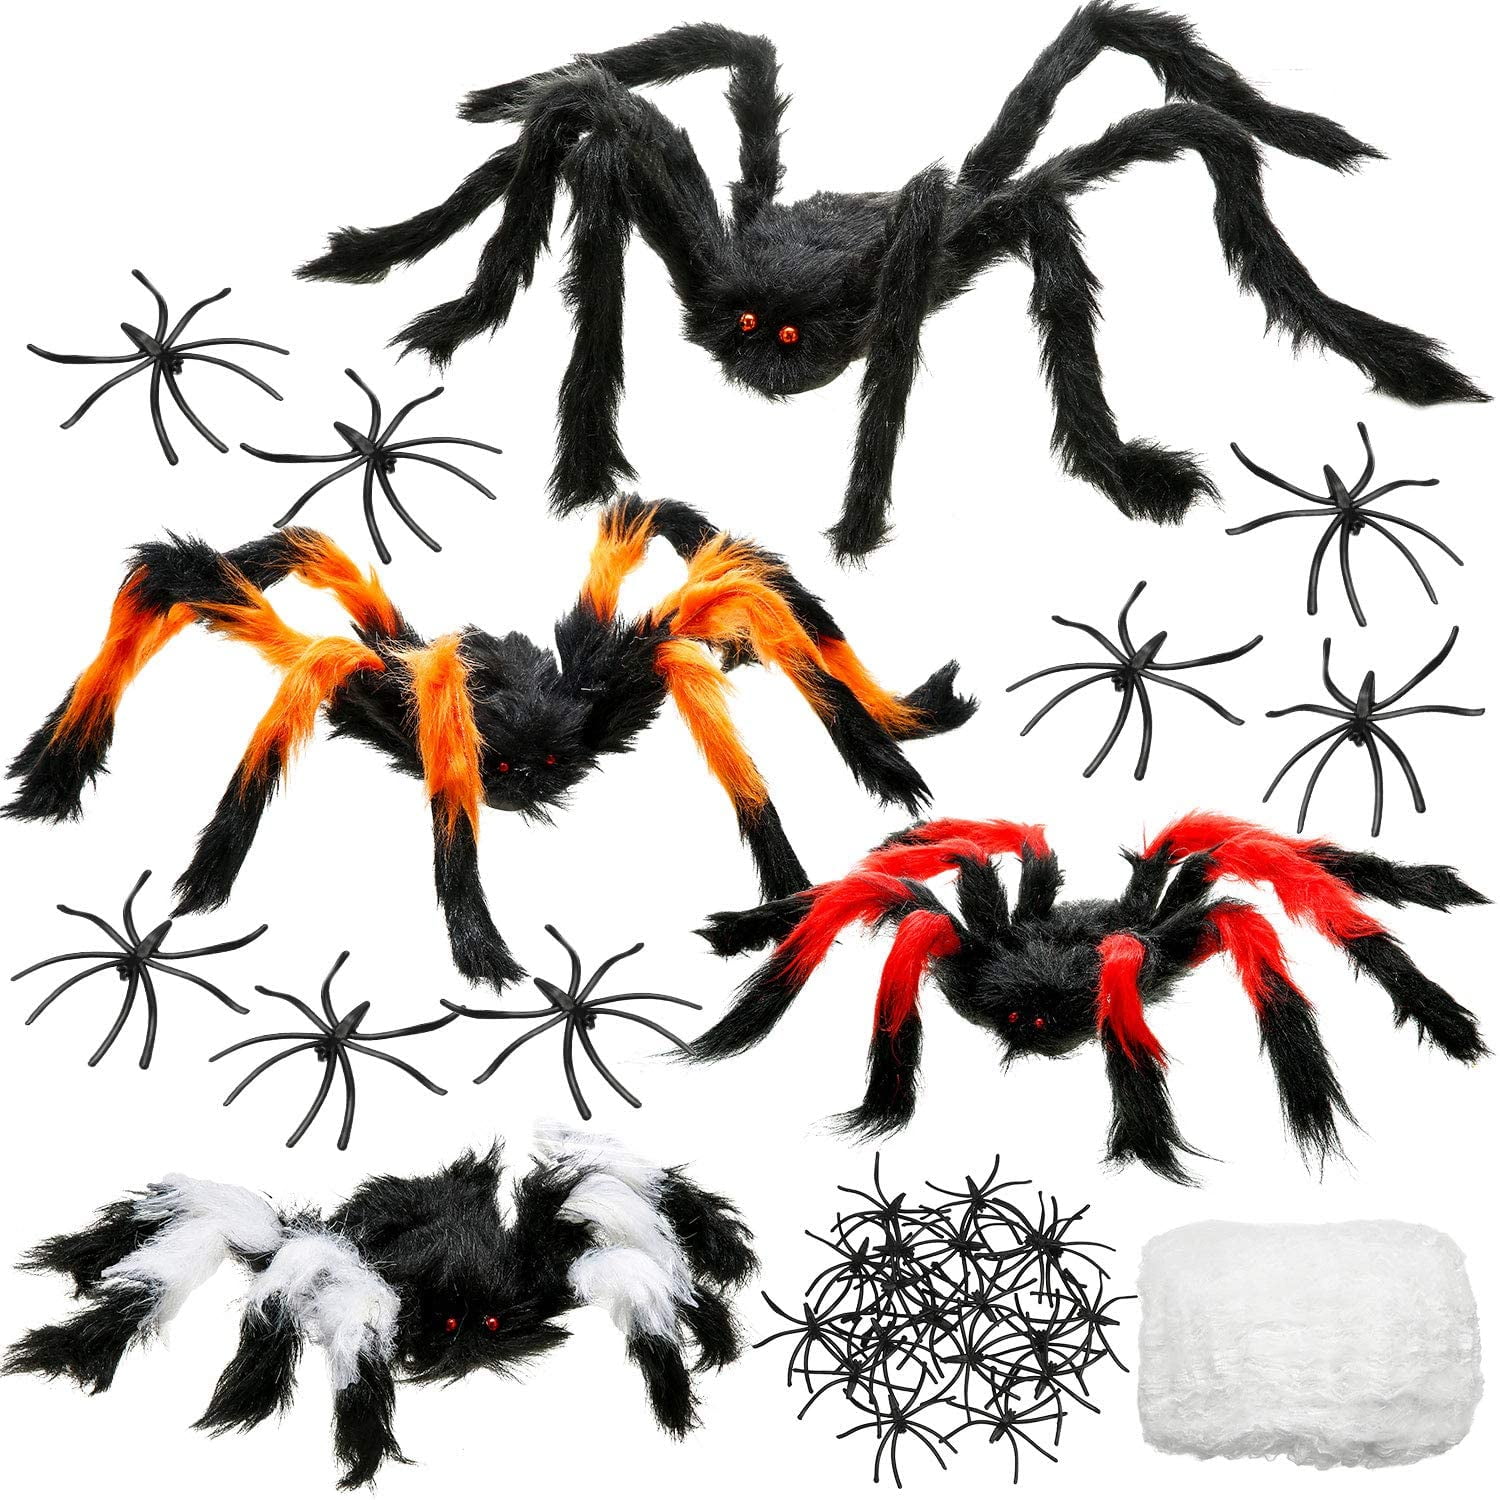 NIP SCARY GIANT LAWN SPIDER or 3 SPOOKY HANGING SPIDERS SPIDERS HALLOWEEN 